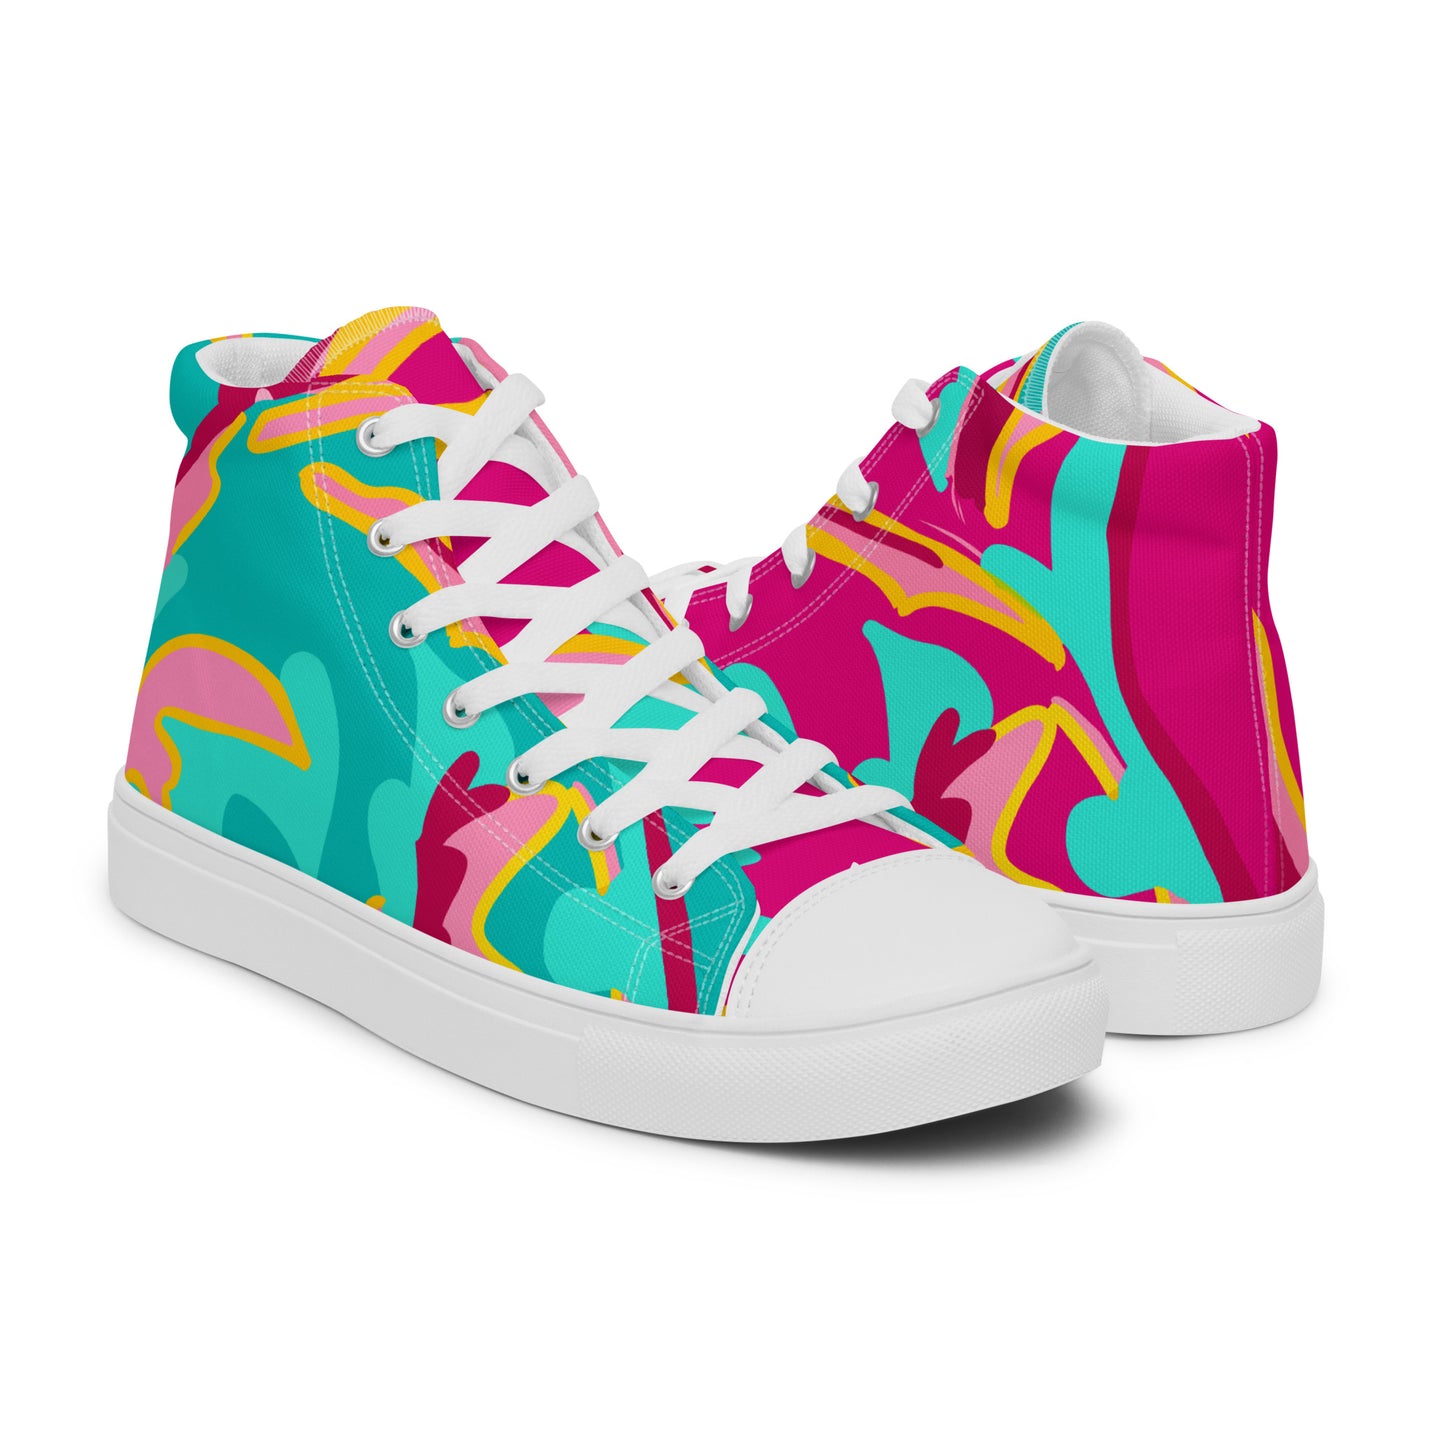 Embrace Body Love High Top Canvas Shoes, Split Colour- Hot Pink/Teal (Women's Sizing)